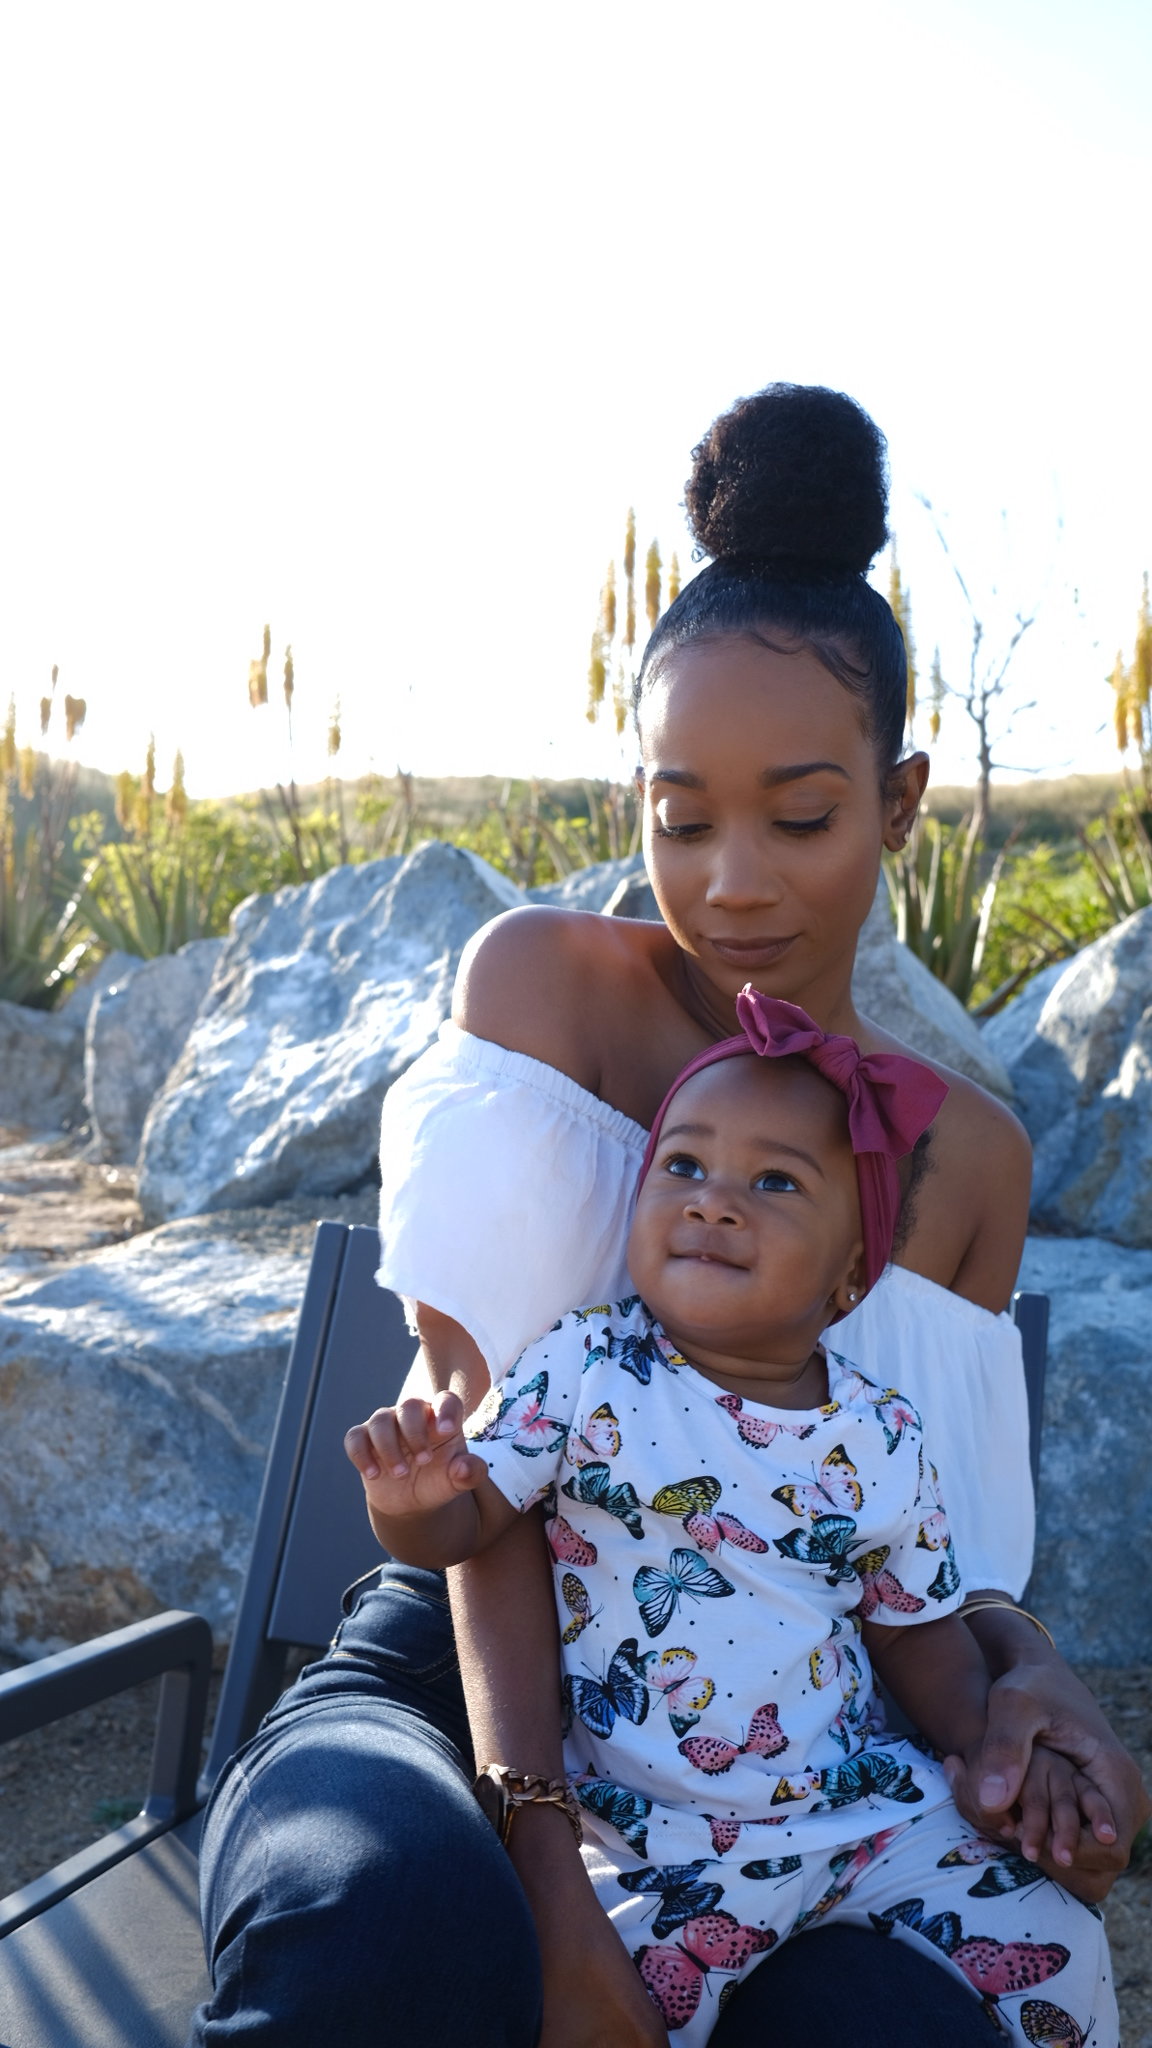 7 lessons I've learned in the first year of motherhood